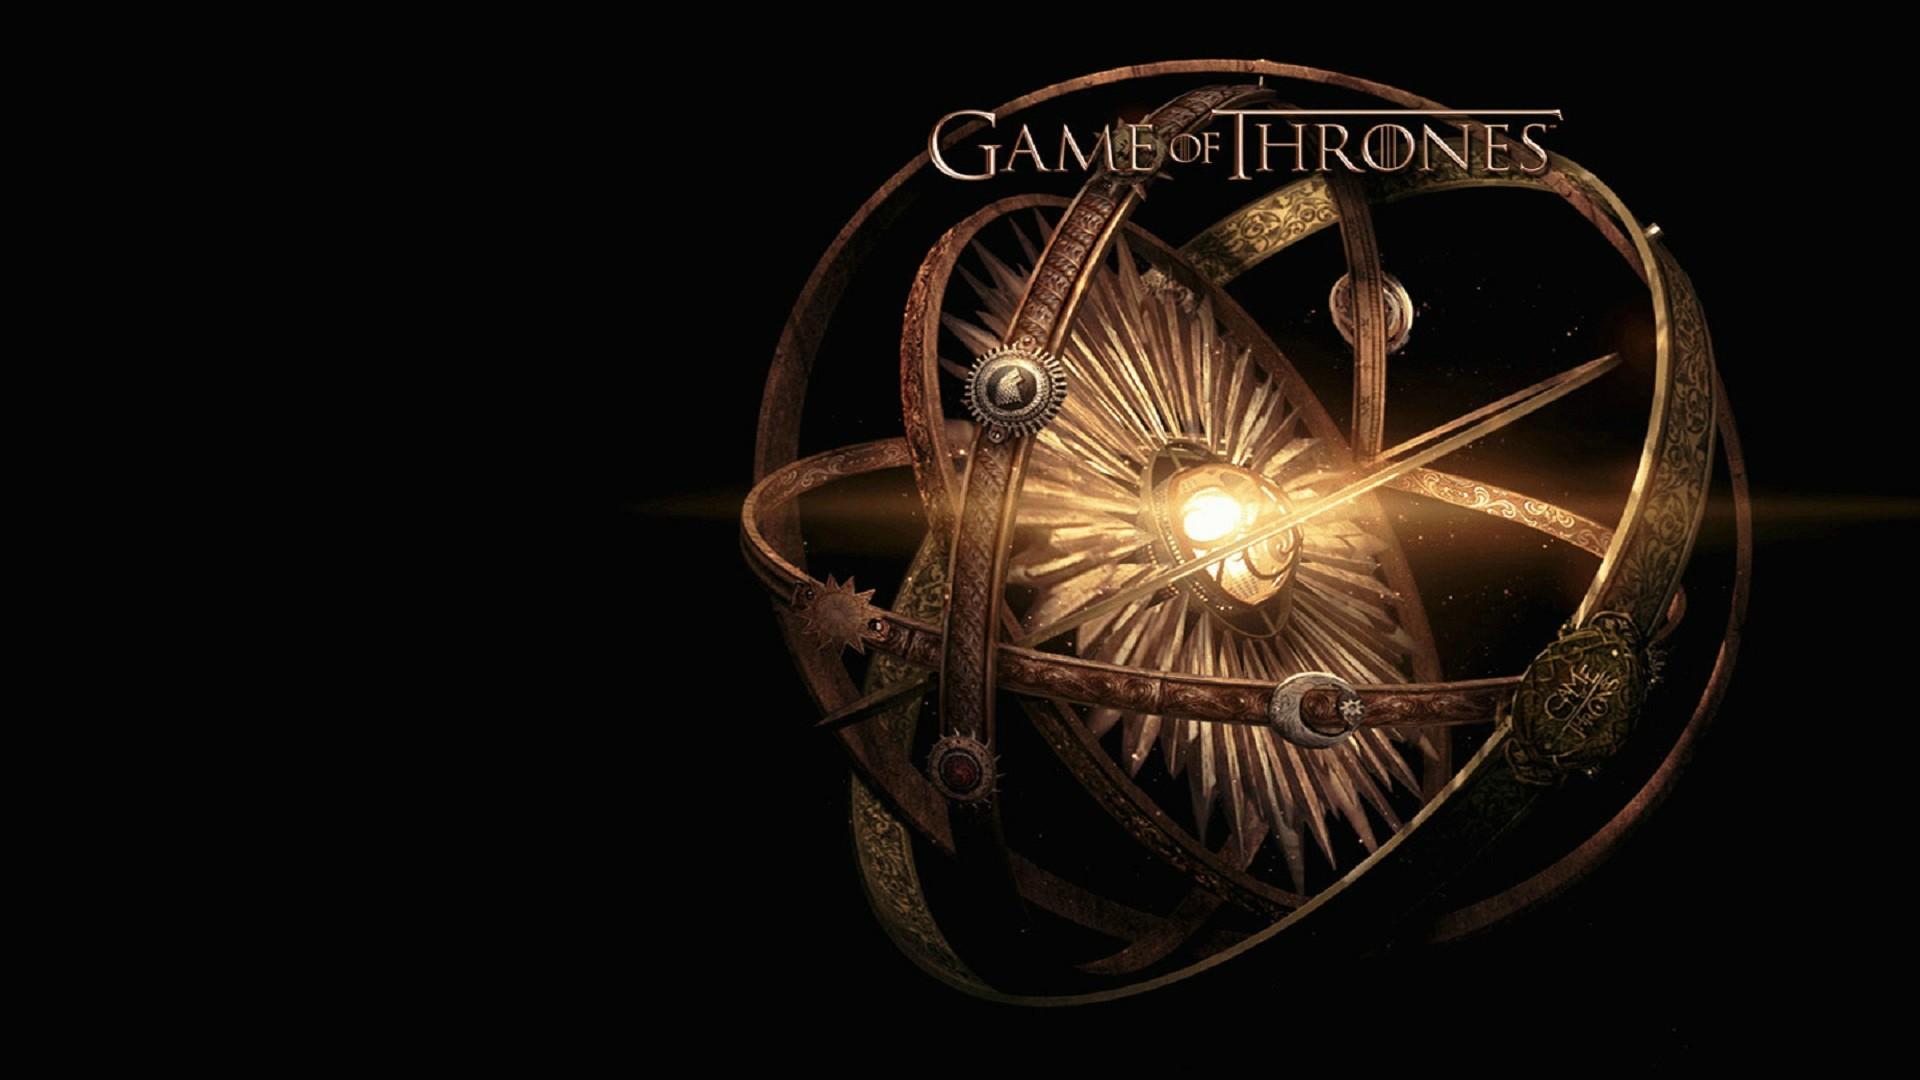 1920 x 1080 · jpeg - HBO Game of Thrones Wallpapers (42+ images)